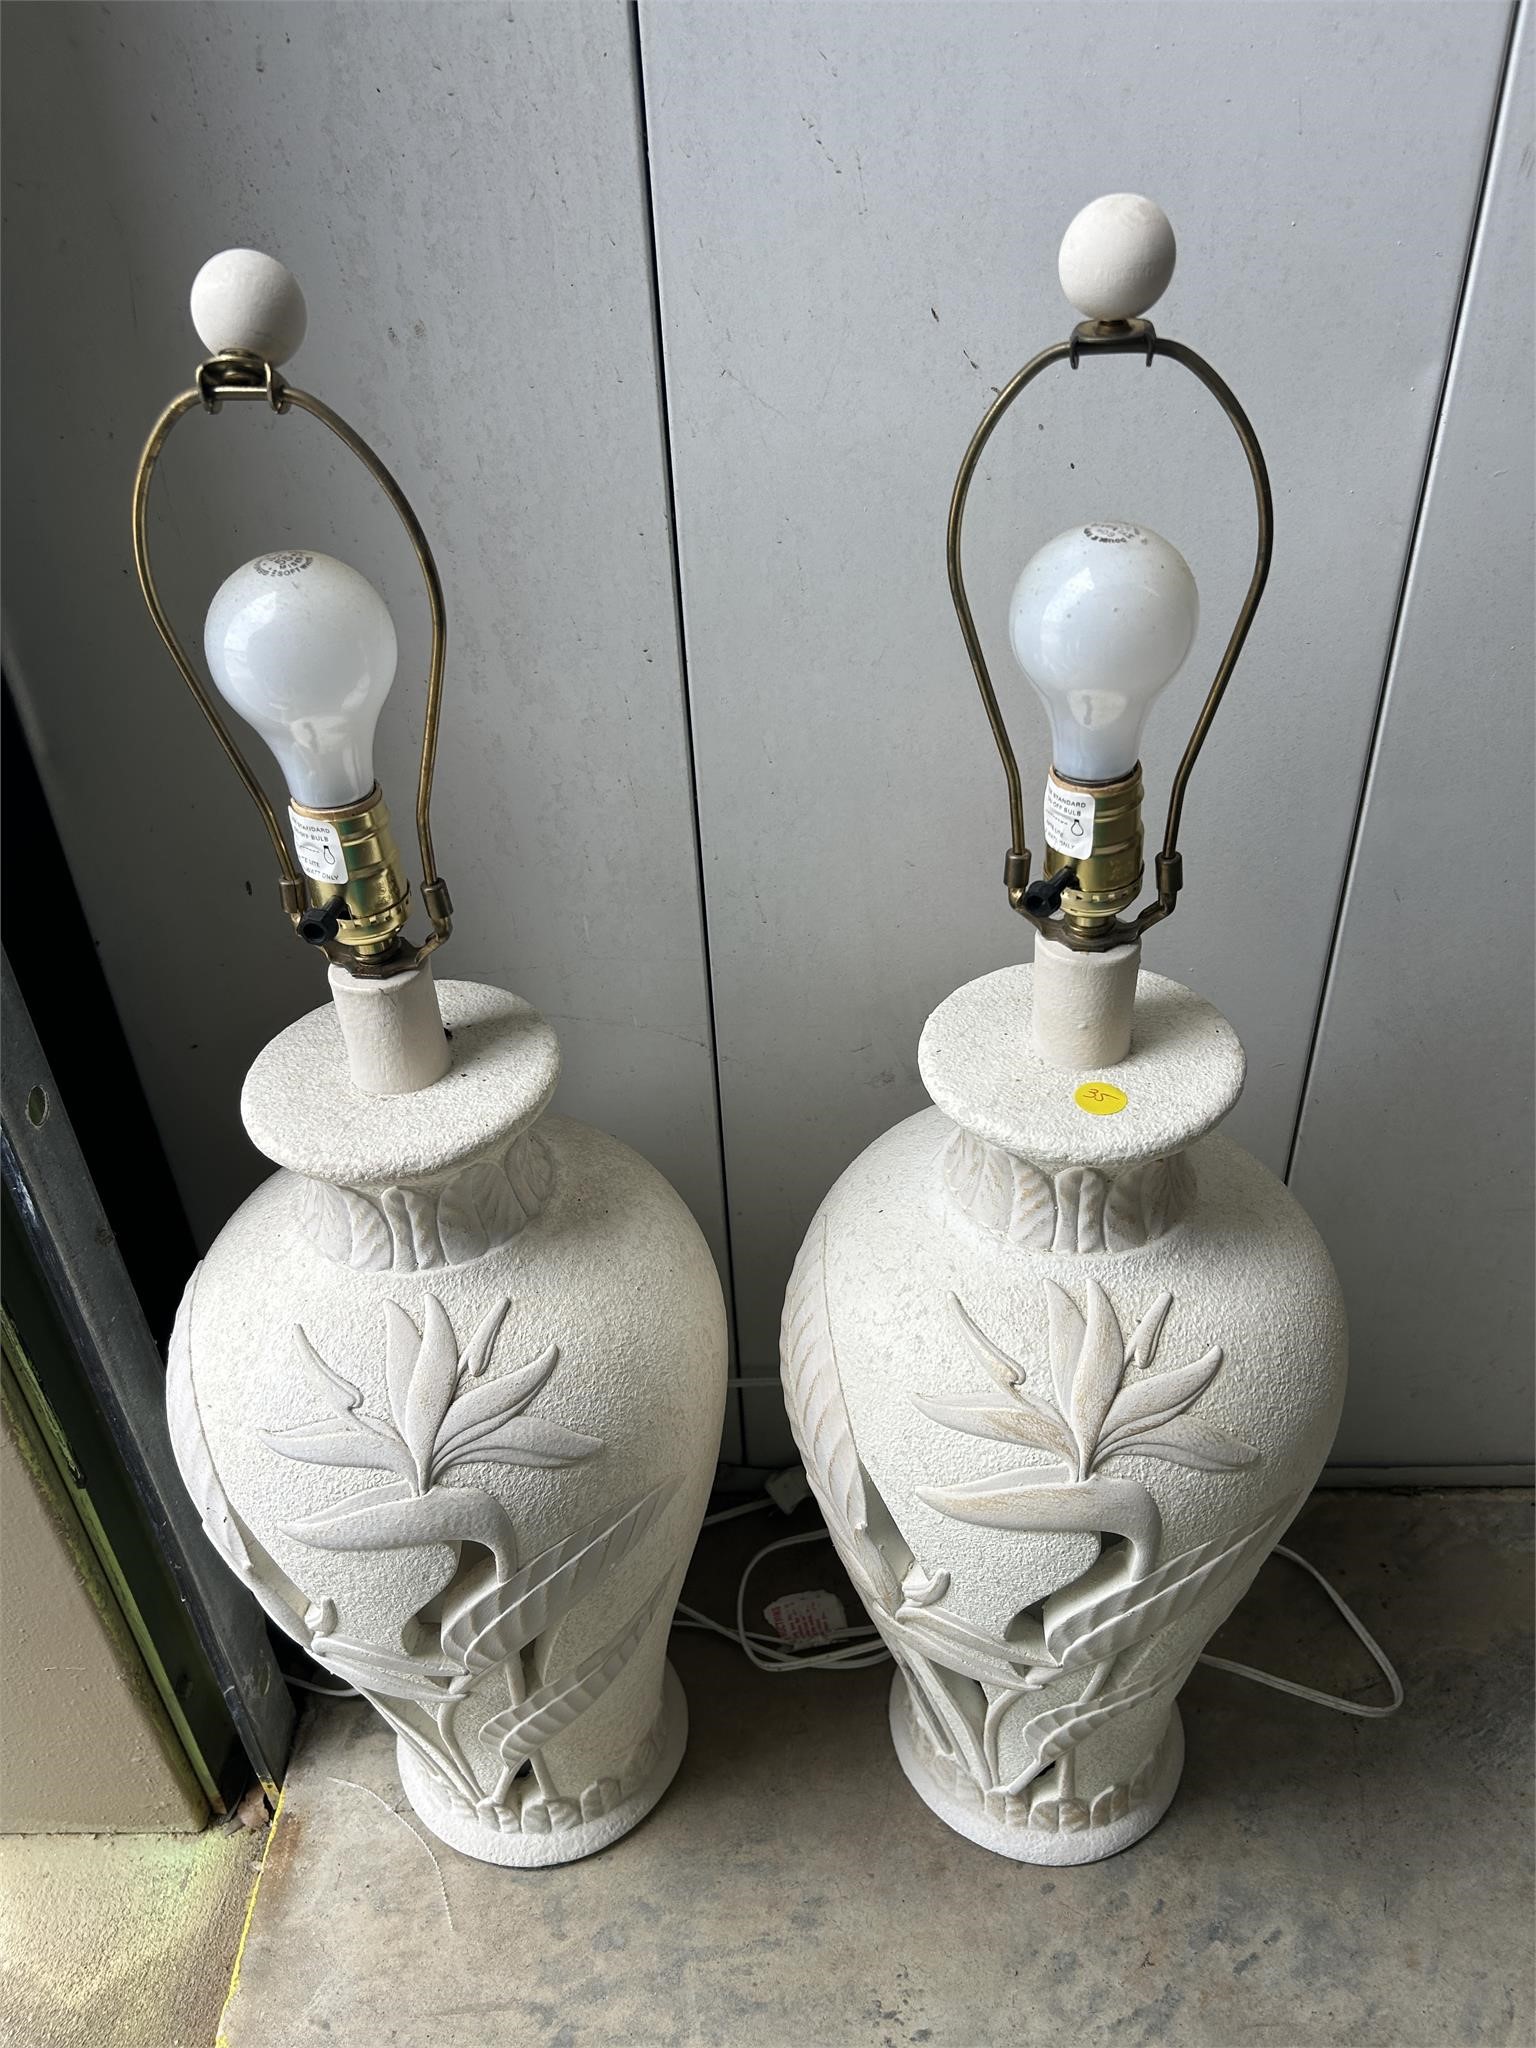 Pair of Stucco-styled Elegant Lamps (need shades)